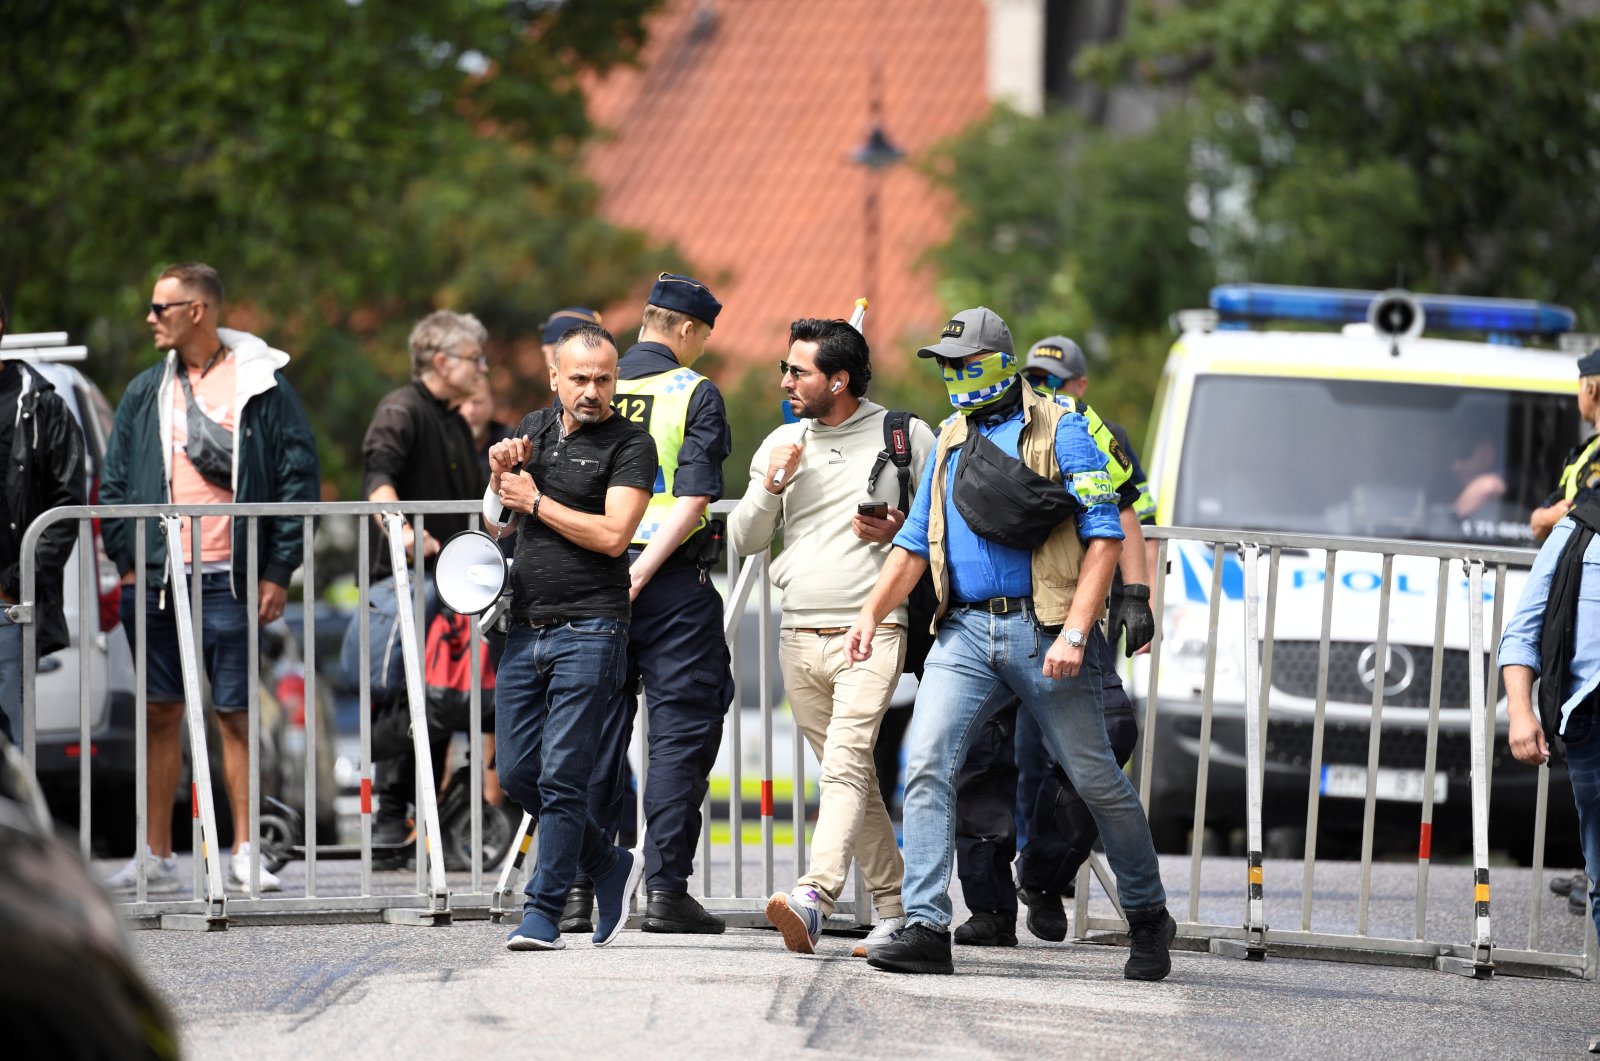 Iraqi refugee Salwan Momika, who planned to burn a copy of the Quran and the Iraqi flag,  is escorted by police to a location outside the Iraqi embassy, in Stockholm, Sweden July 20, 2023. (TT News Agency via Reuters, File Photo)